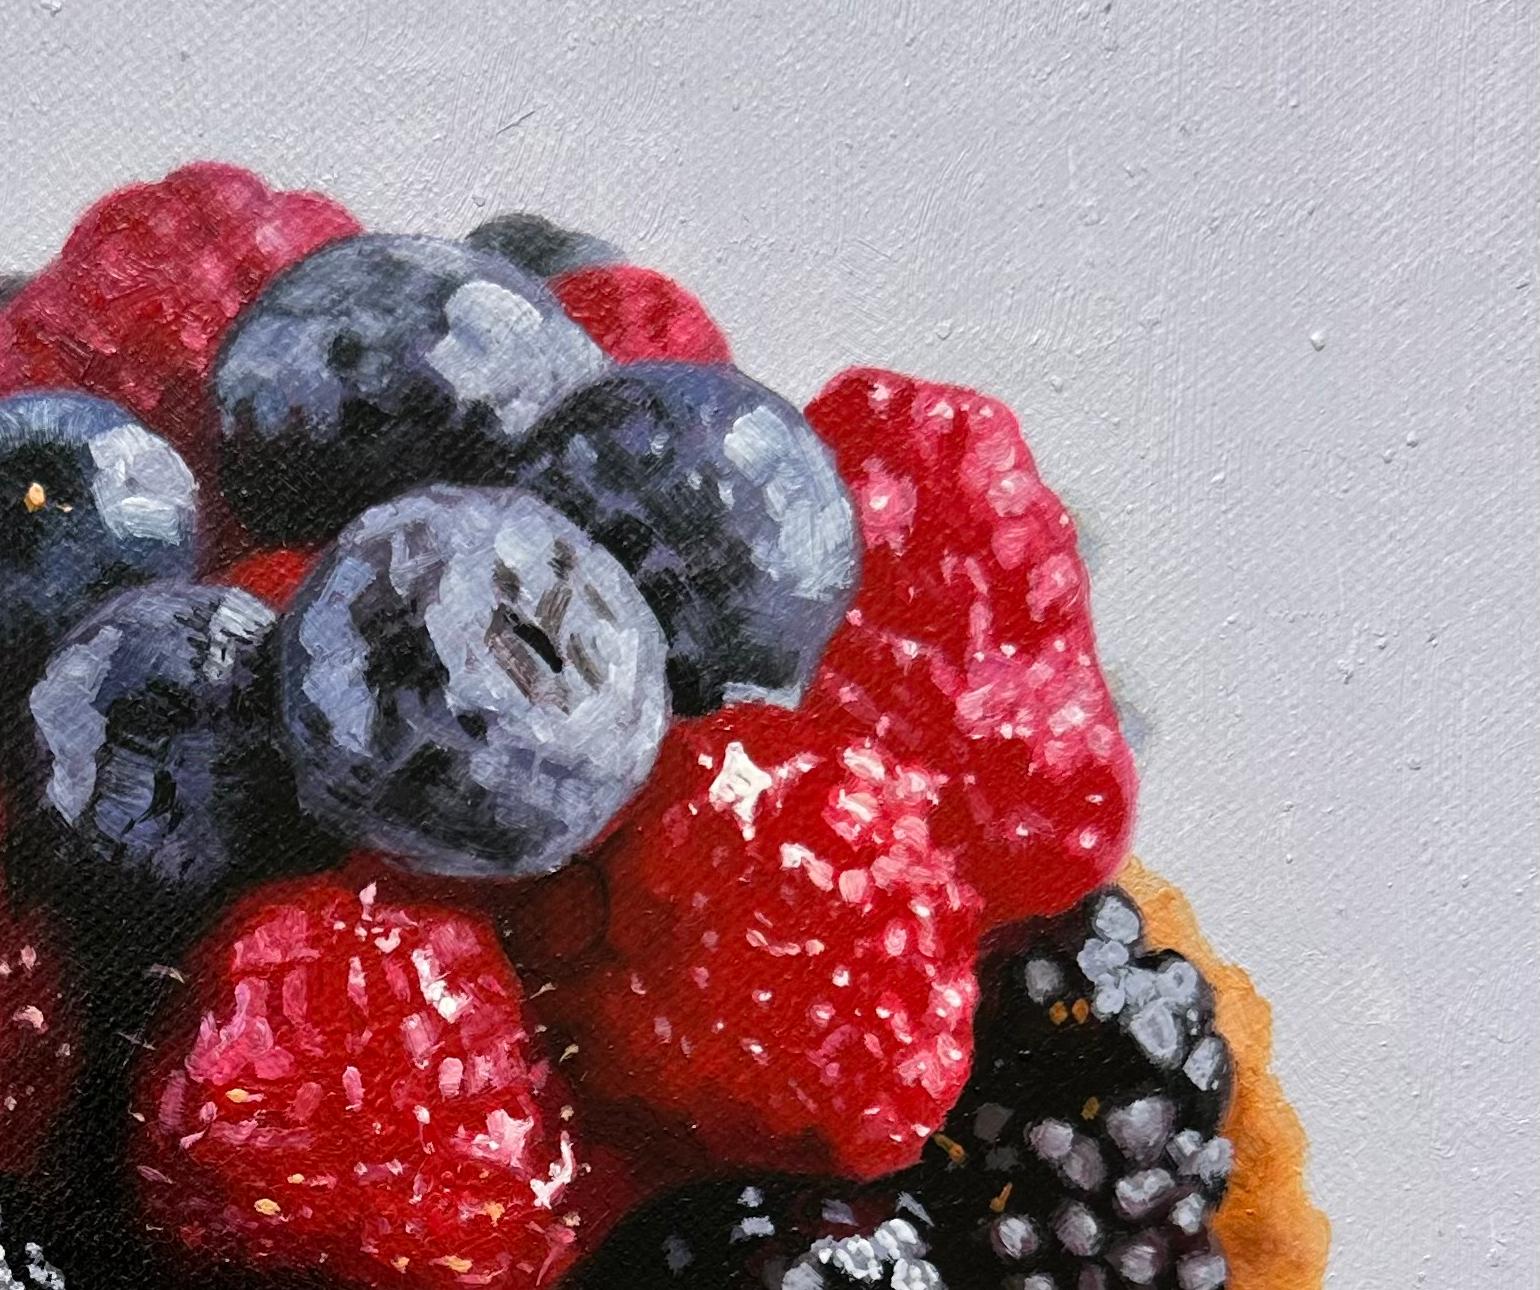 Blackberry, Raspberry, and Blueberry Tart with Hair - Painting by Marc Dennis